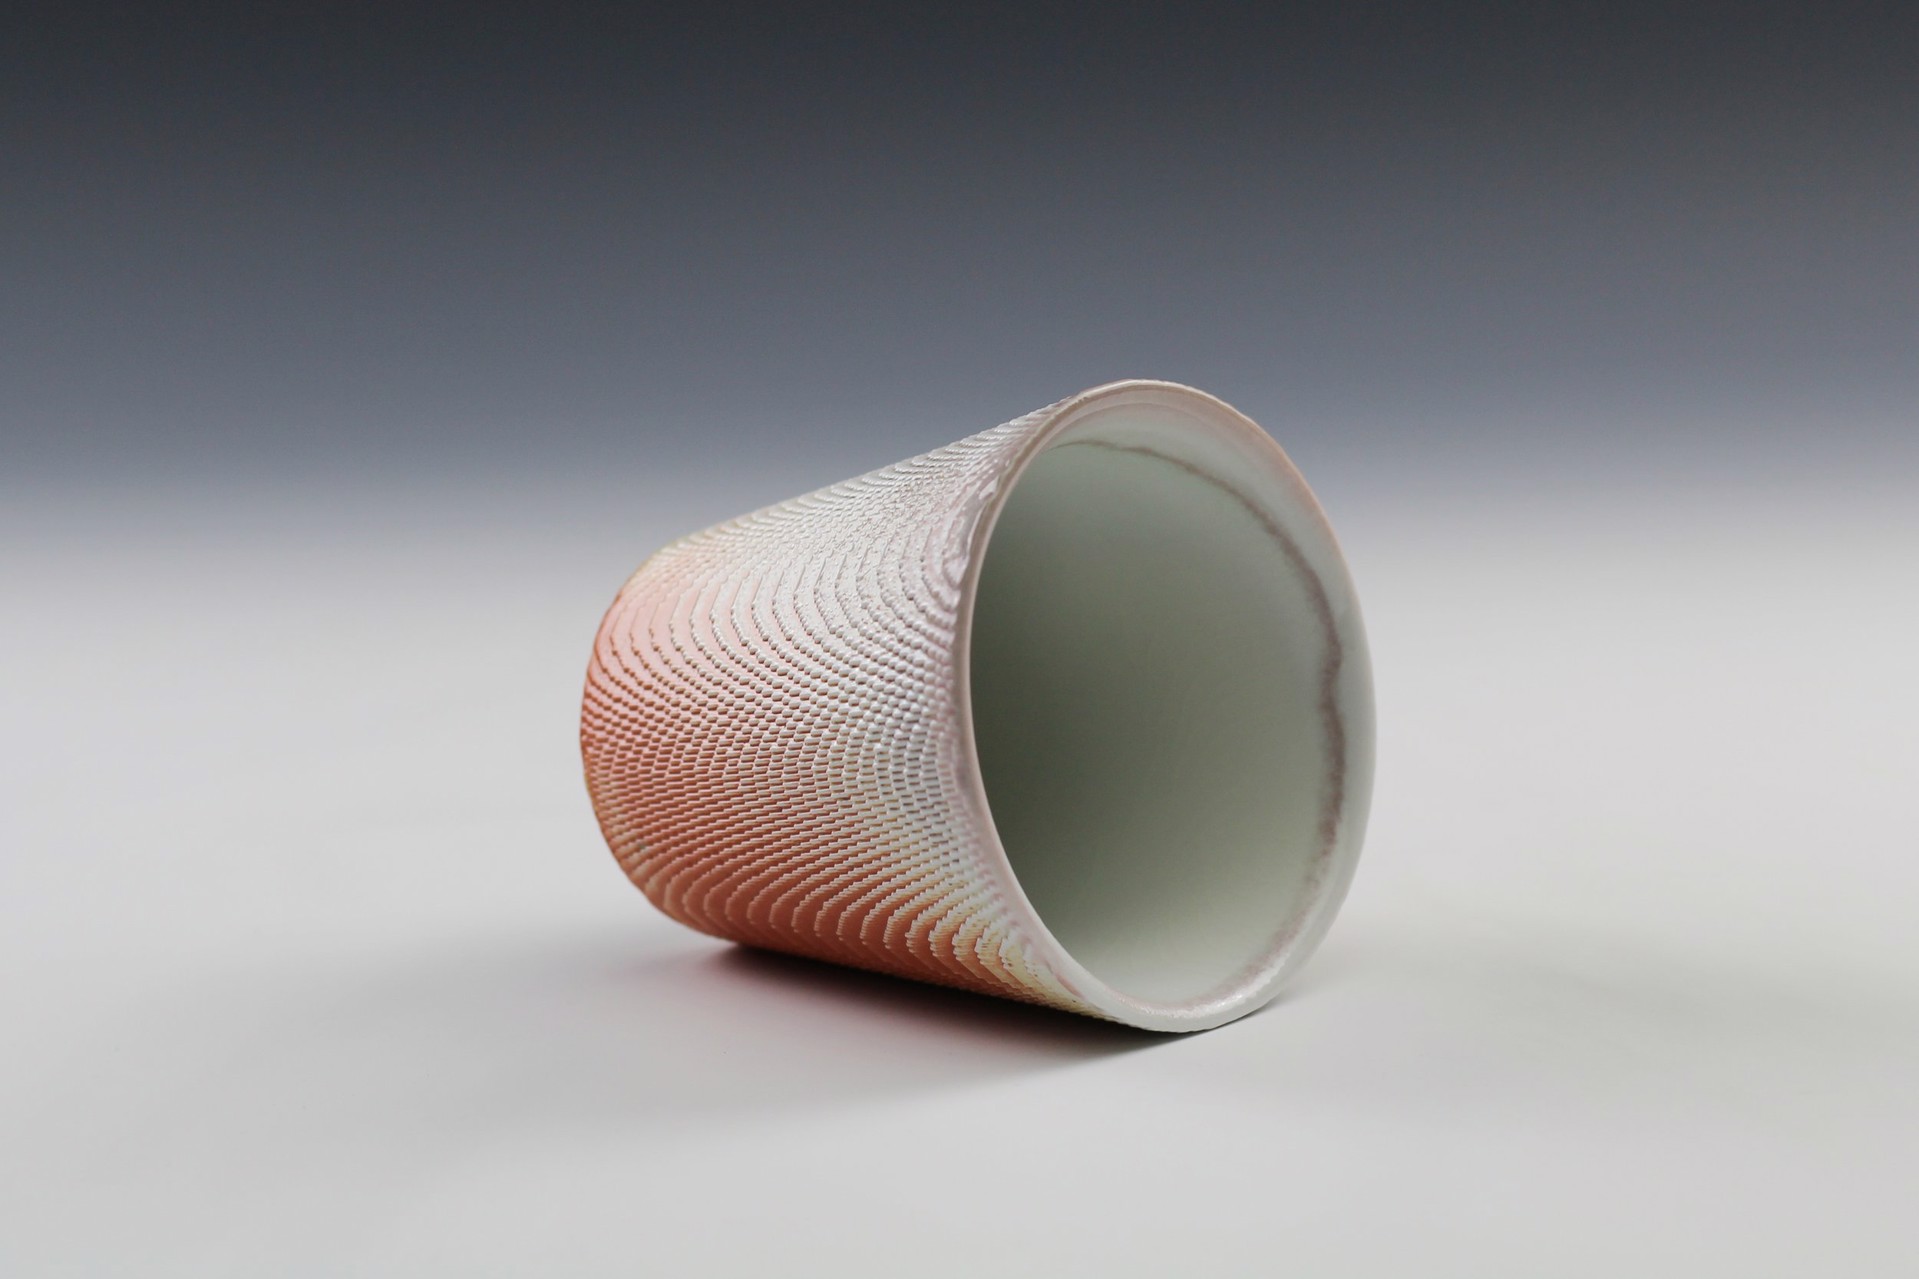 Cup by Jeff Campana